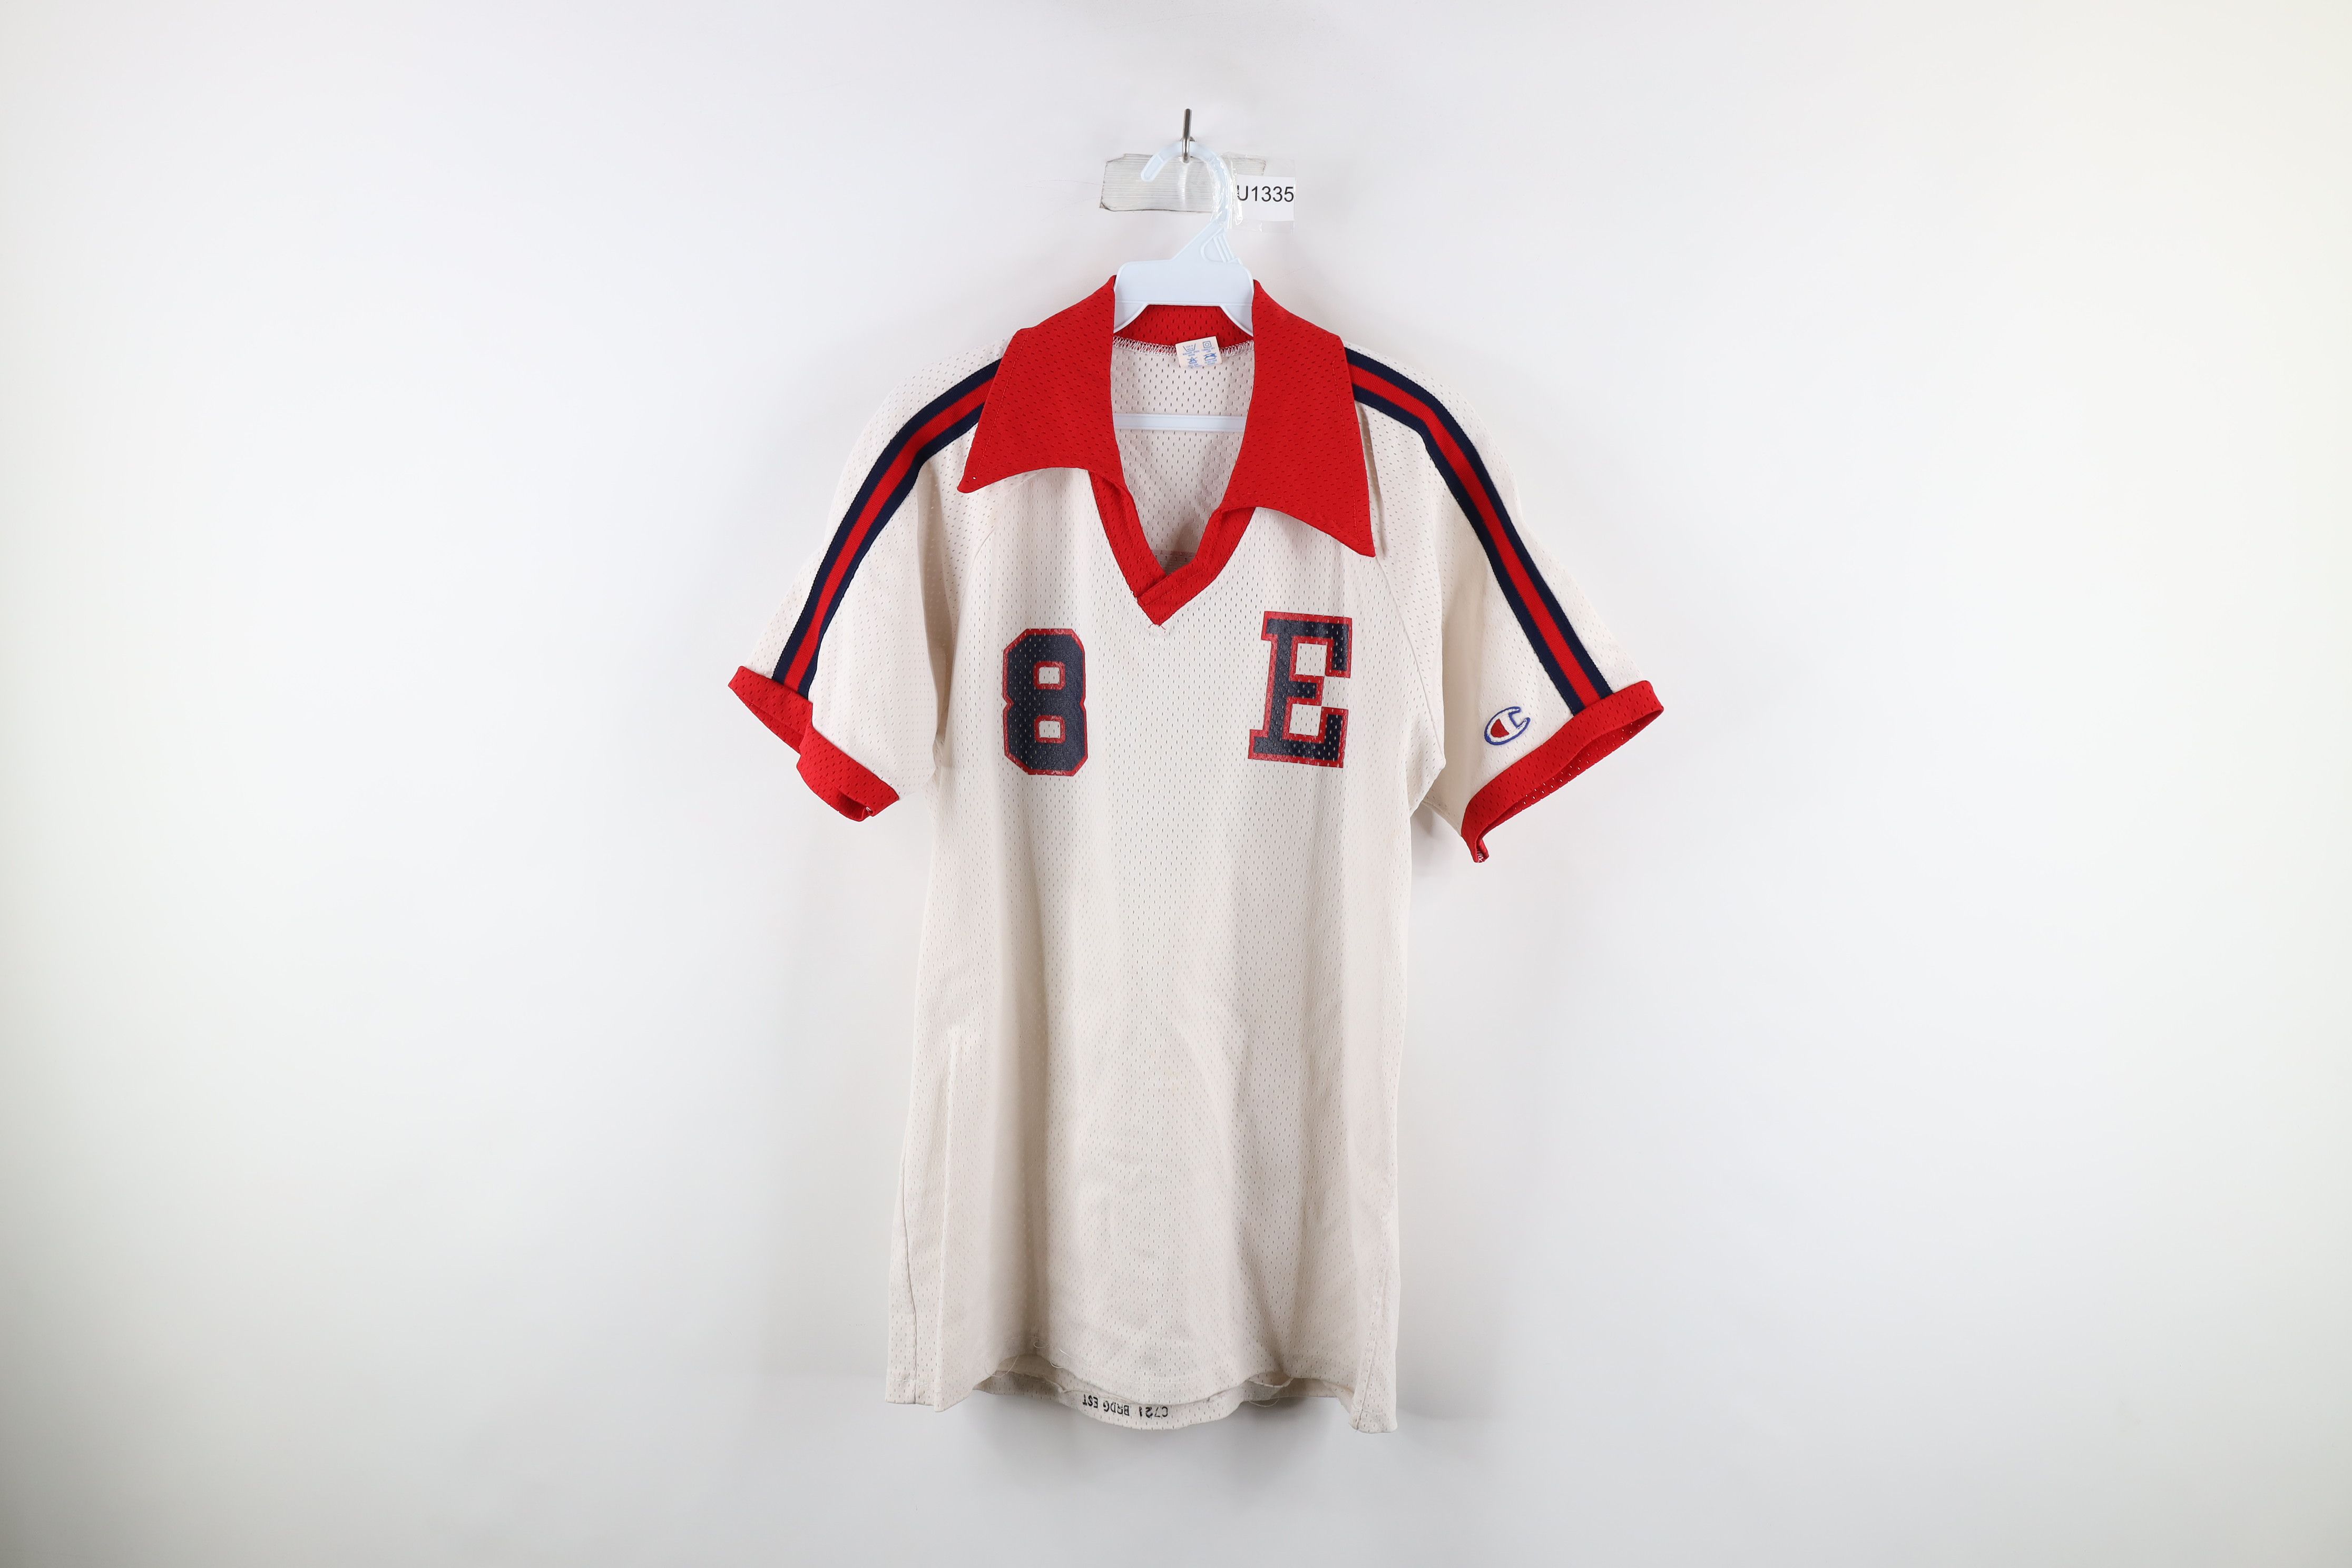 Vintage Vintage 80s Champion Mesh Short Sleeve Collared Jersey USA Size US M / EU 48-50 / 2 - 1 Preview